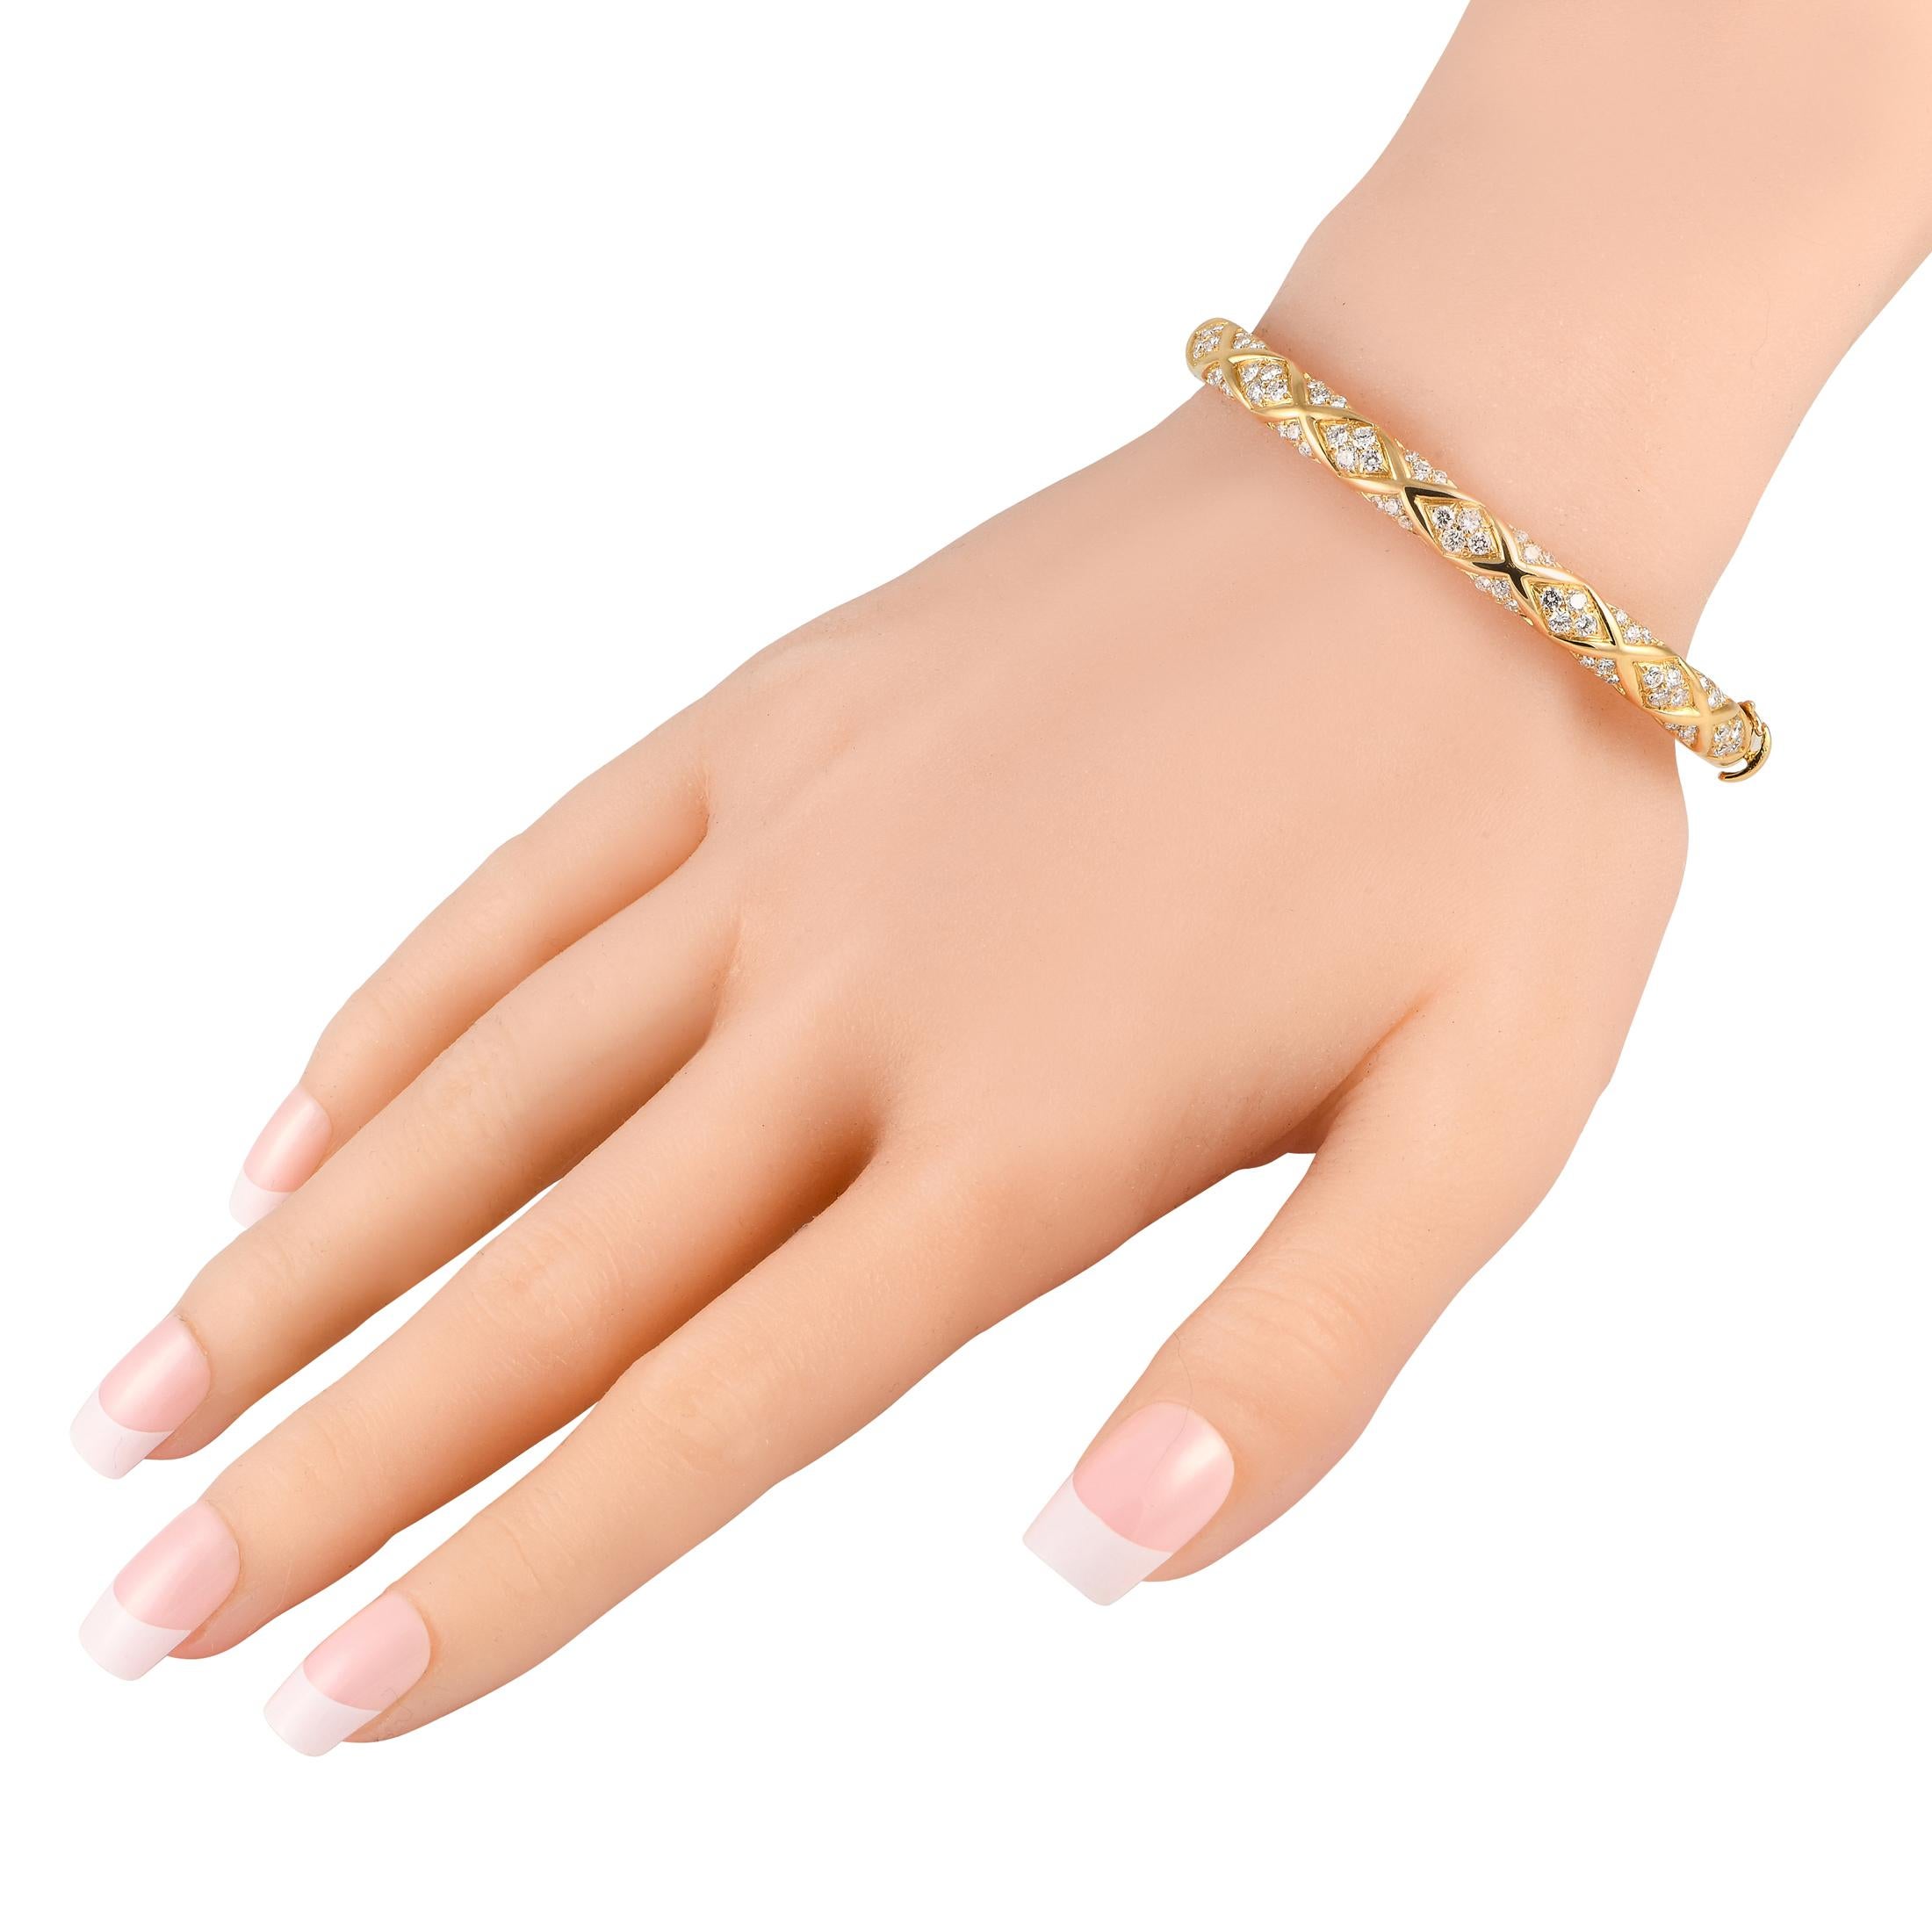 Chic and incredibly sophisticated, this Van Cleef & Arpels bracelet is poised to continually make a statement. An opulent 18K Yellow Gold setting beautifully highlights the sparkling Diamond accents totaling 1.80 carats. This bangle-style bracelet